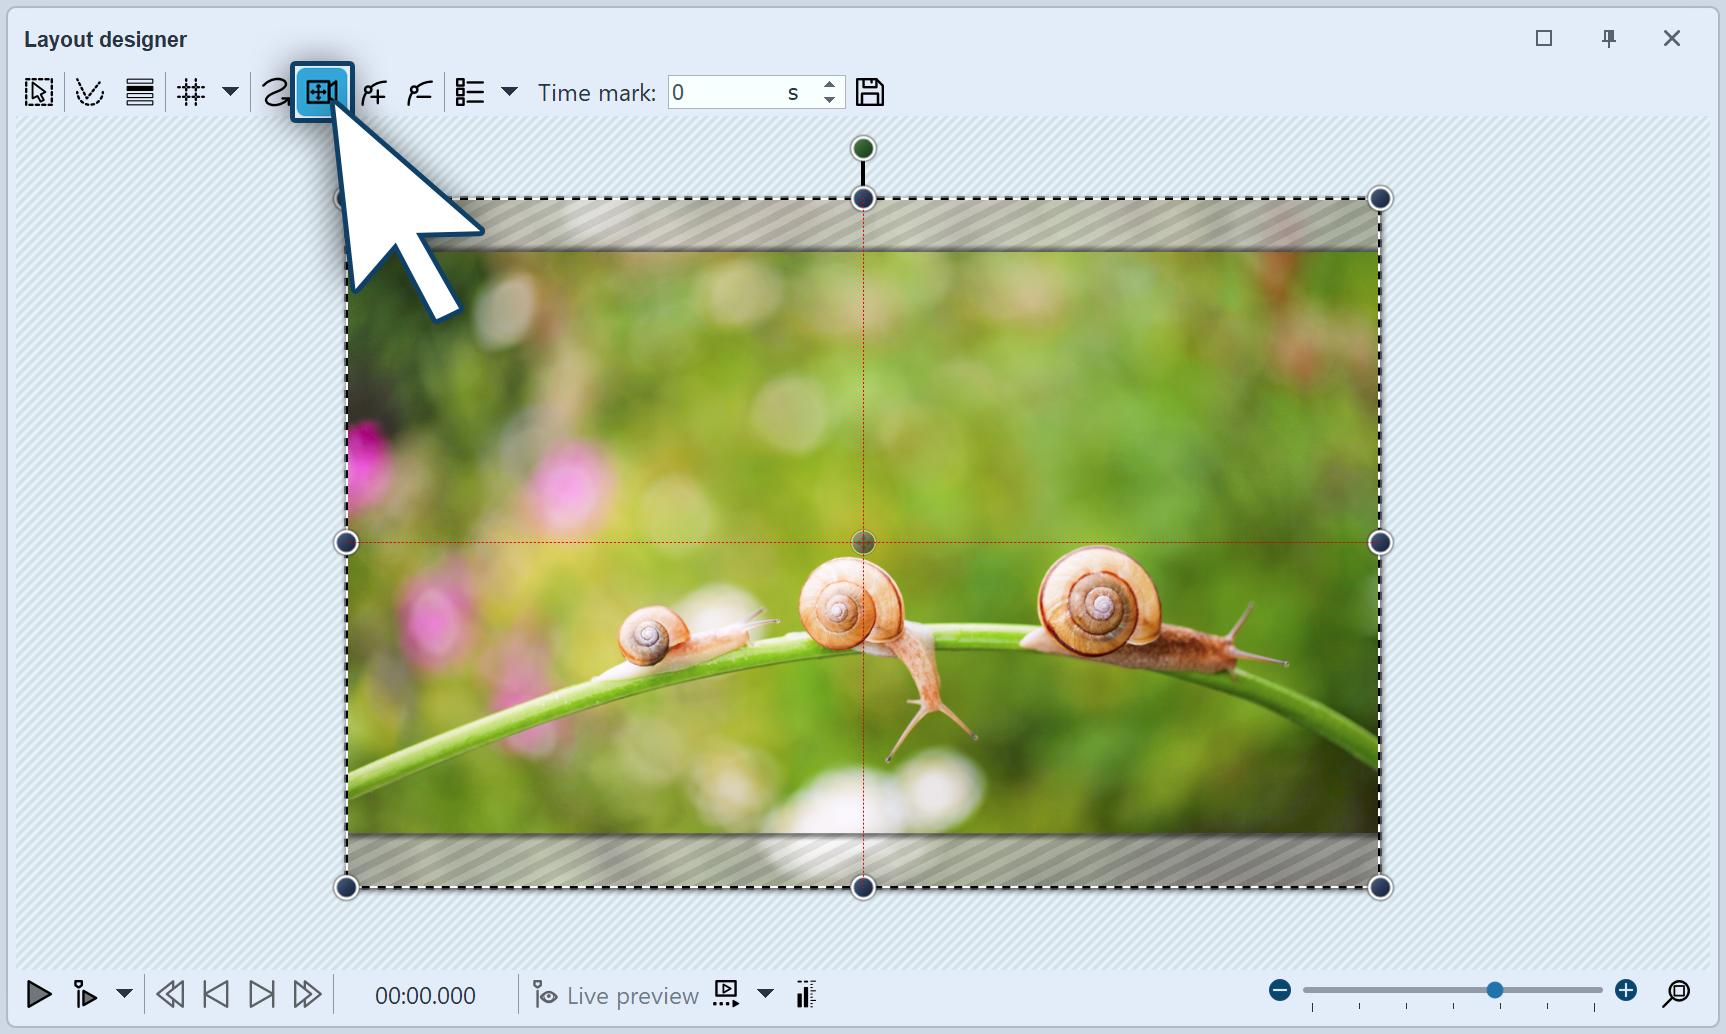 Activating camera panning in the layout designer